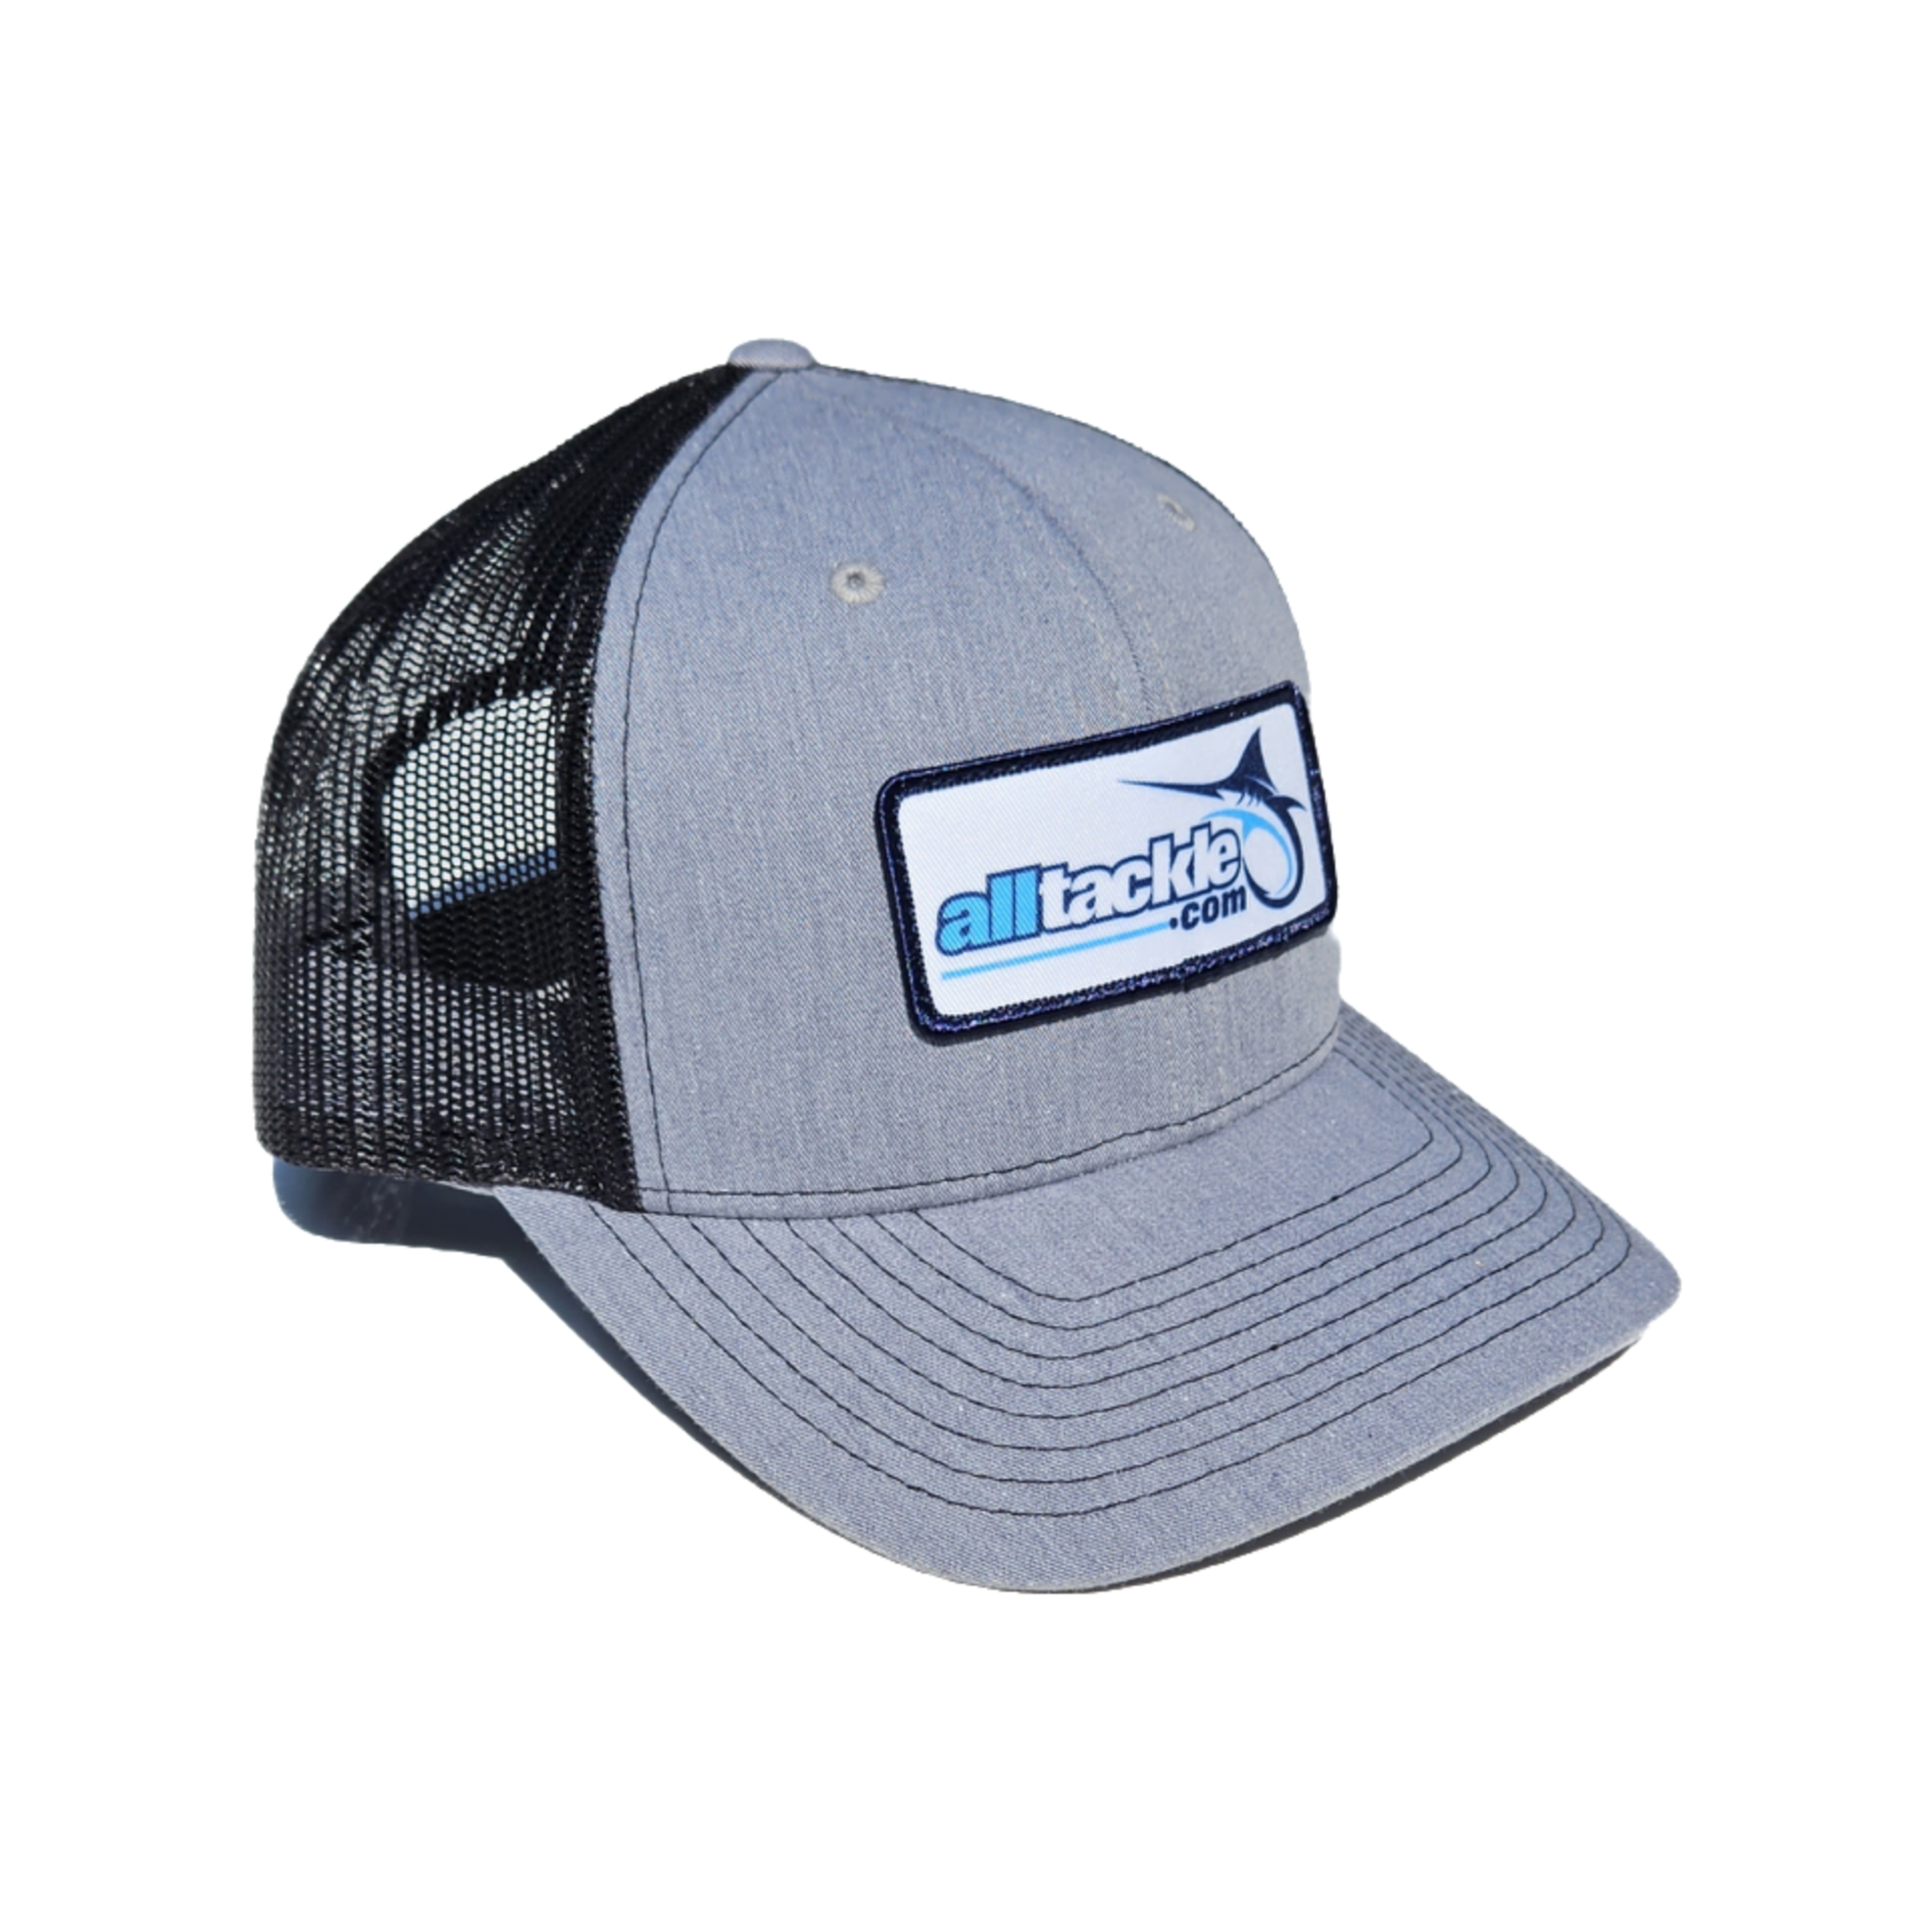 Salty Cracker Realtree Fishing Logo Patch Hat